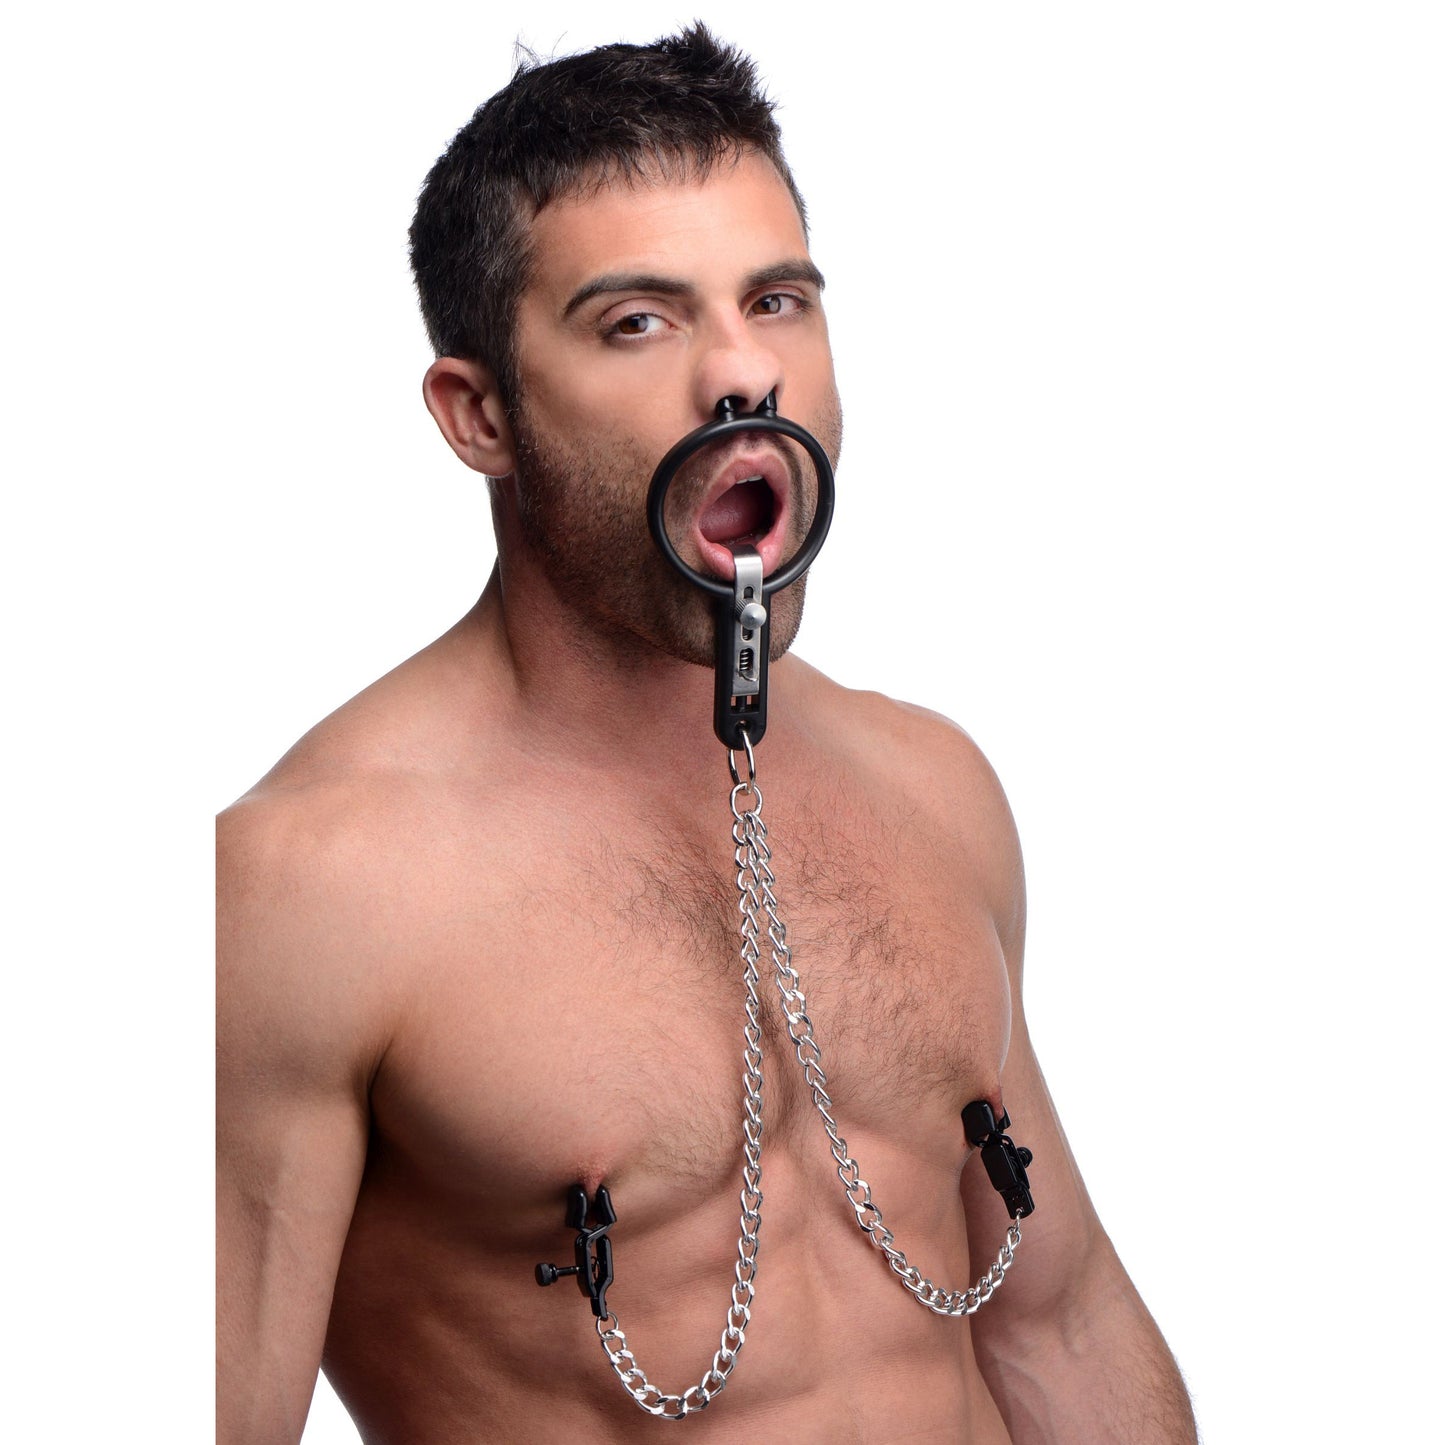 Degraded Mouth Spreader with Nipple Clamps - UABDSM